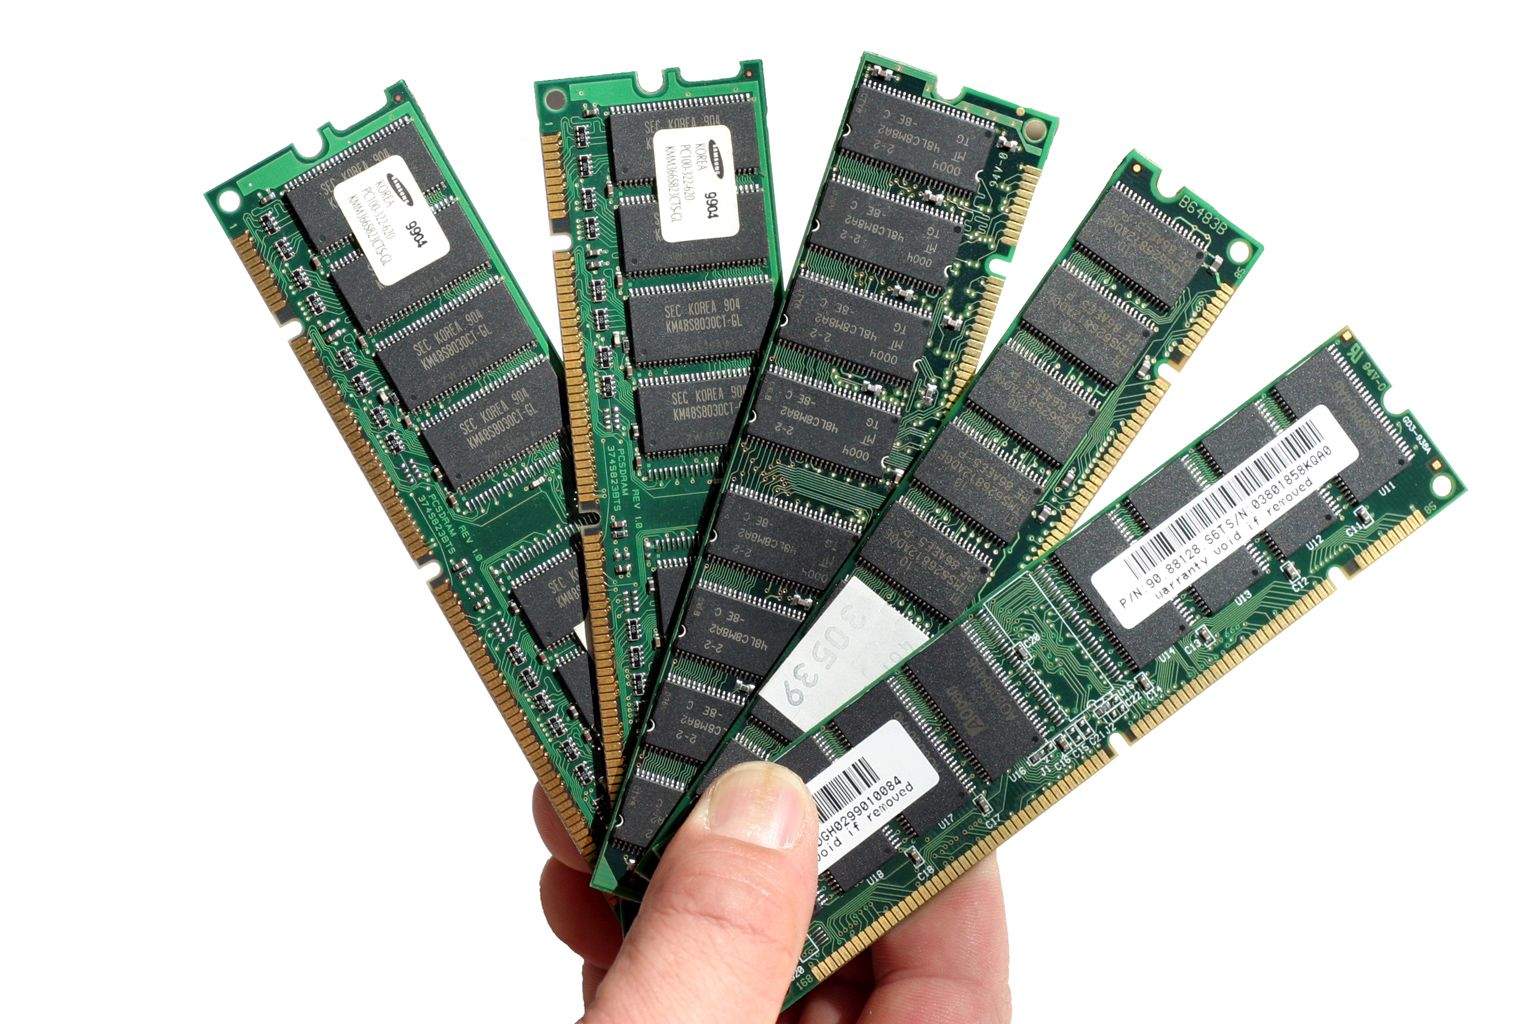 One out of every four sticks of RAM belongs to Apple in 2015.